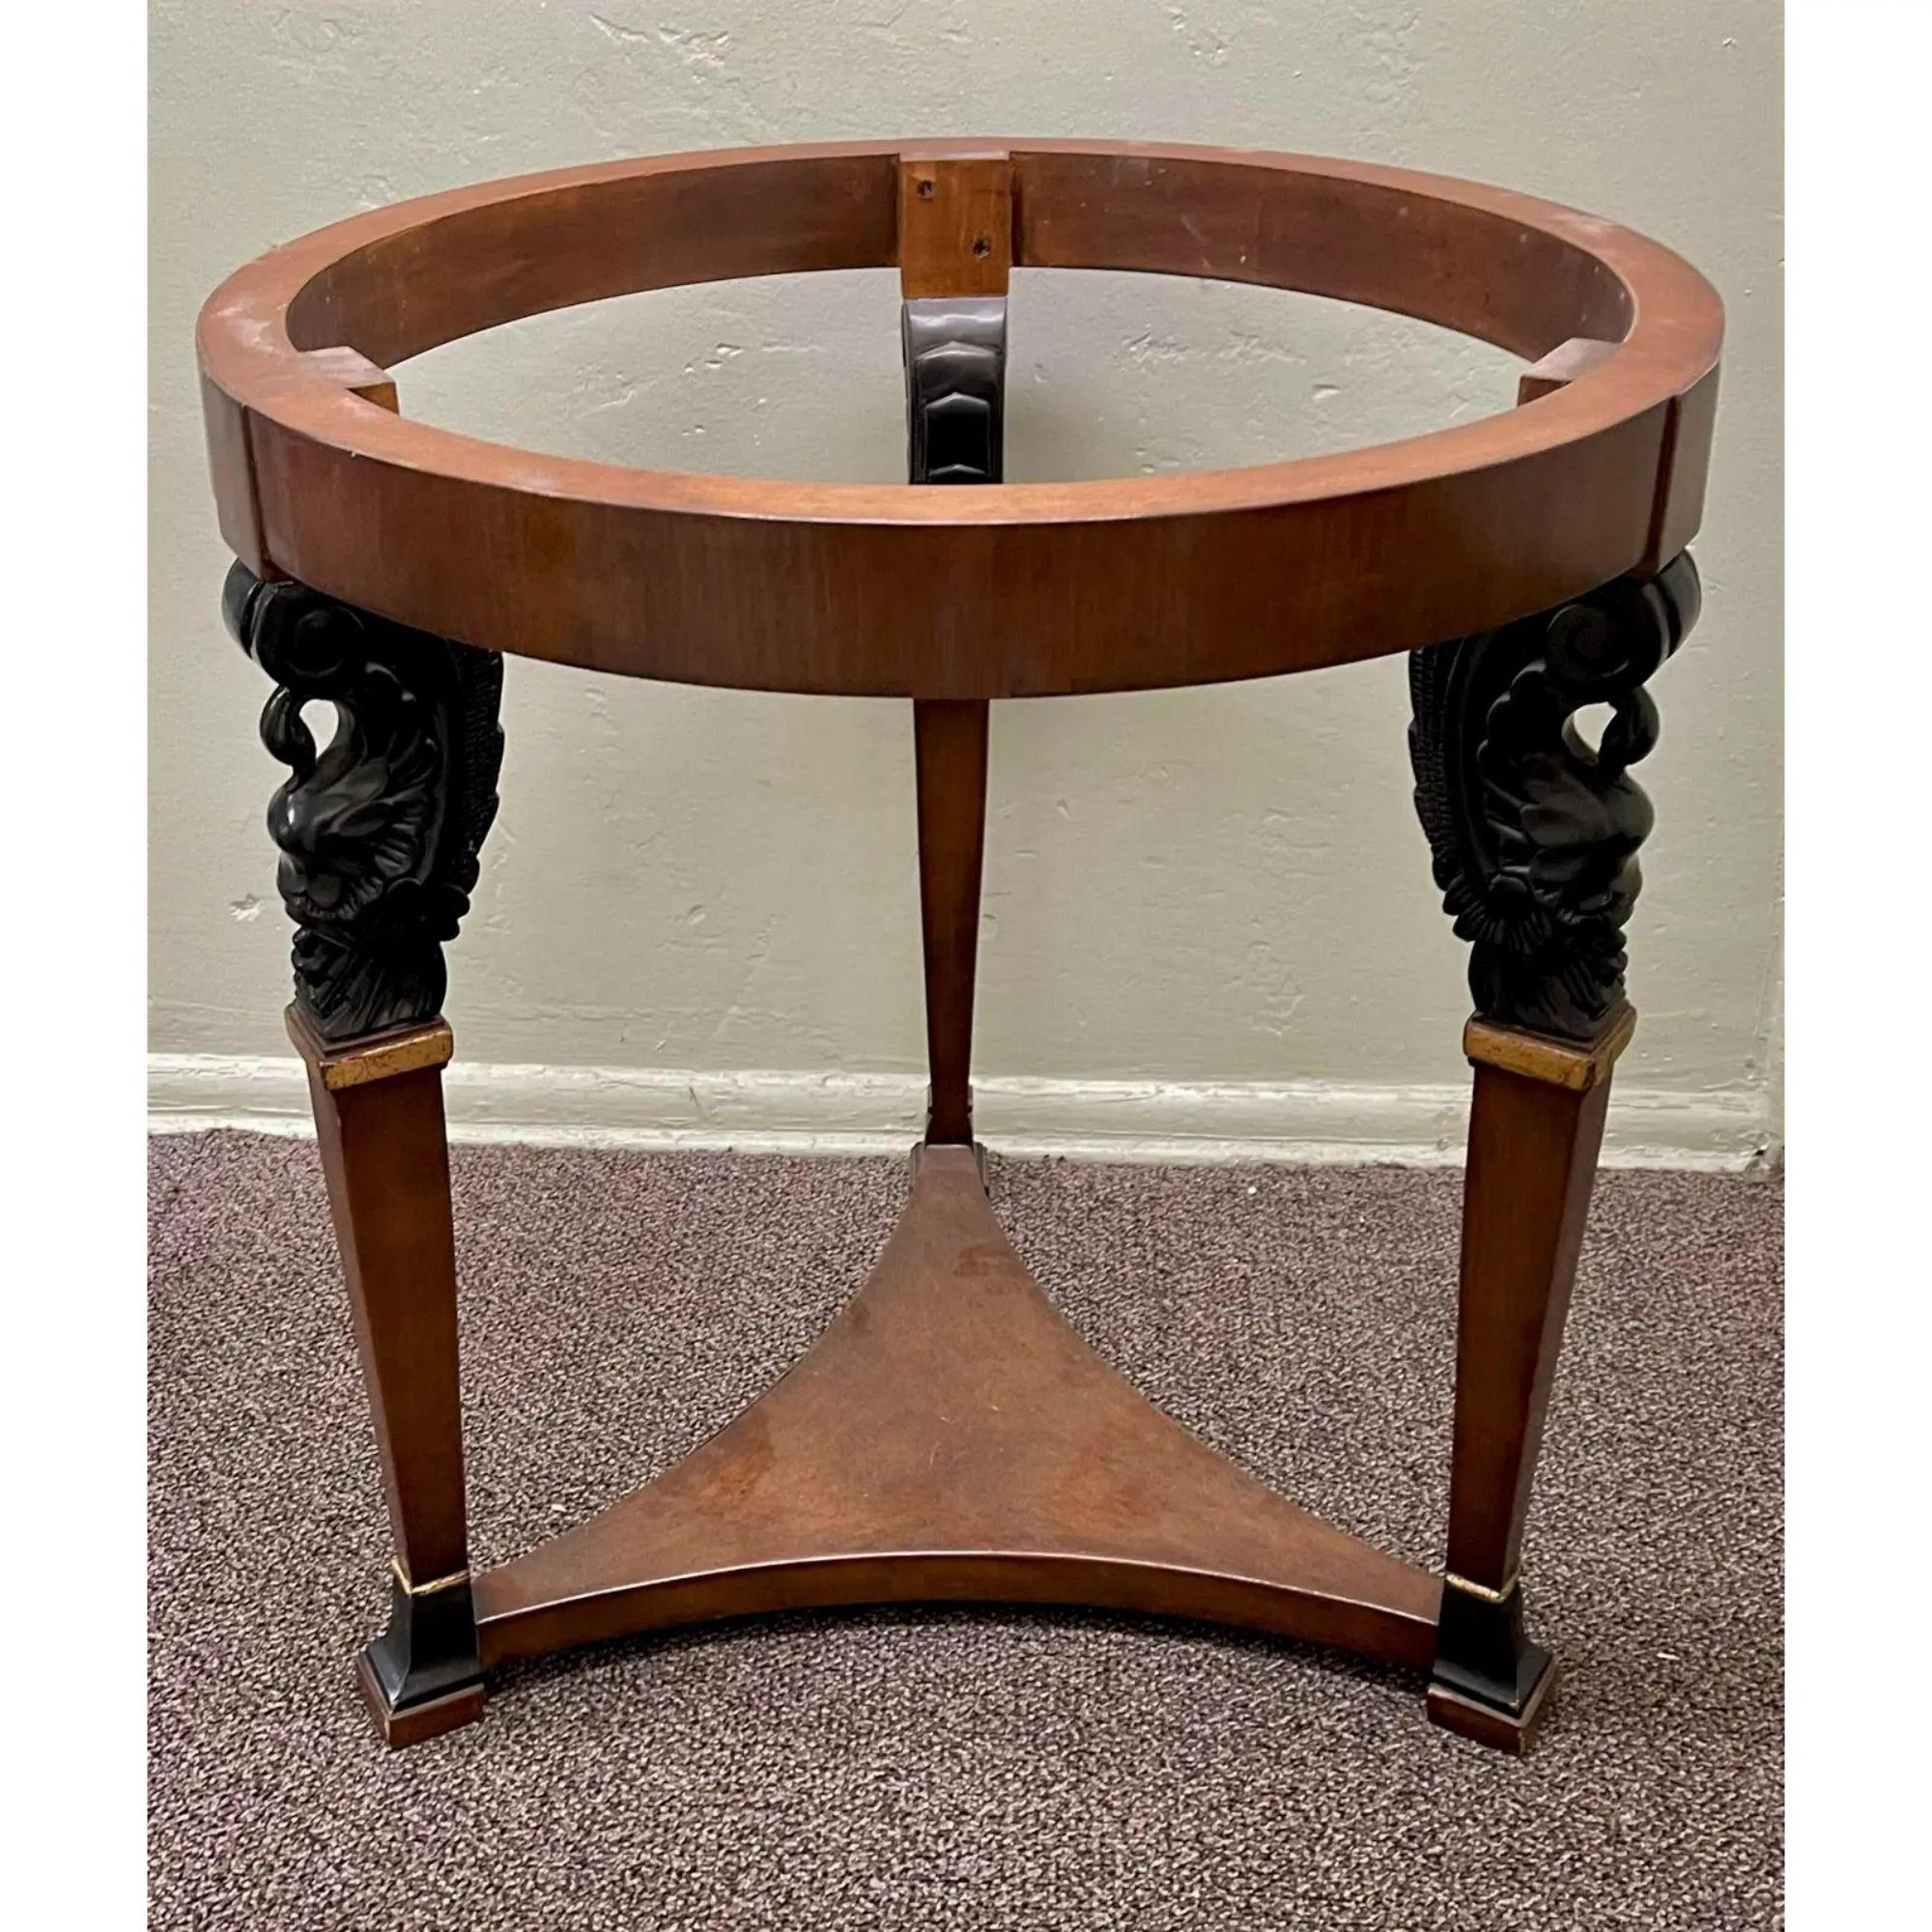 
Directoire Style Charles Pollock for William Switzer Marble Top Table with Ebonized Swans

Additional information:
Materials: Giltwood, Marble
Color: Black
Brand: William Switzer
Period: 1990s
Styles: Empire, French
Table Shape:Round
Item